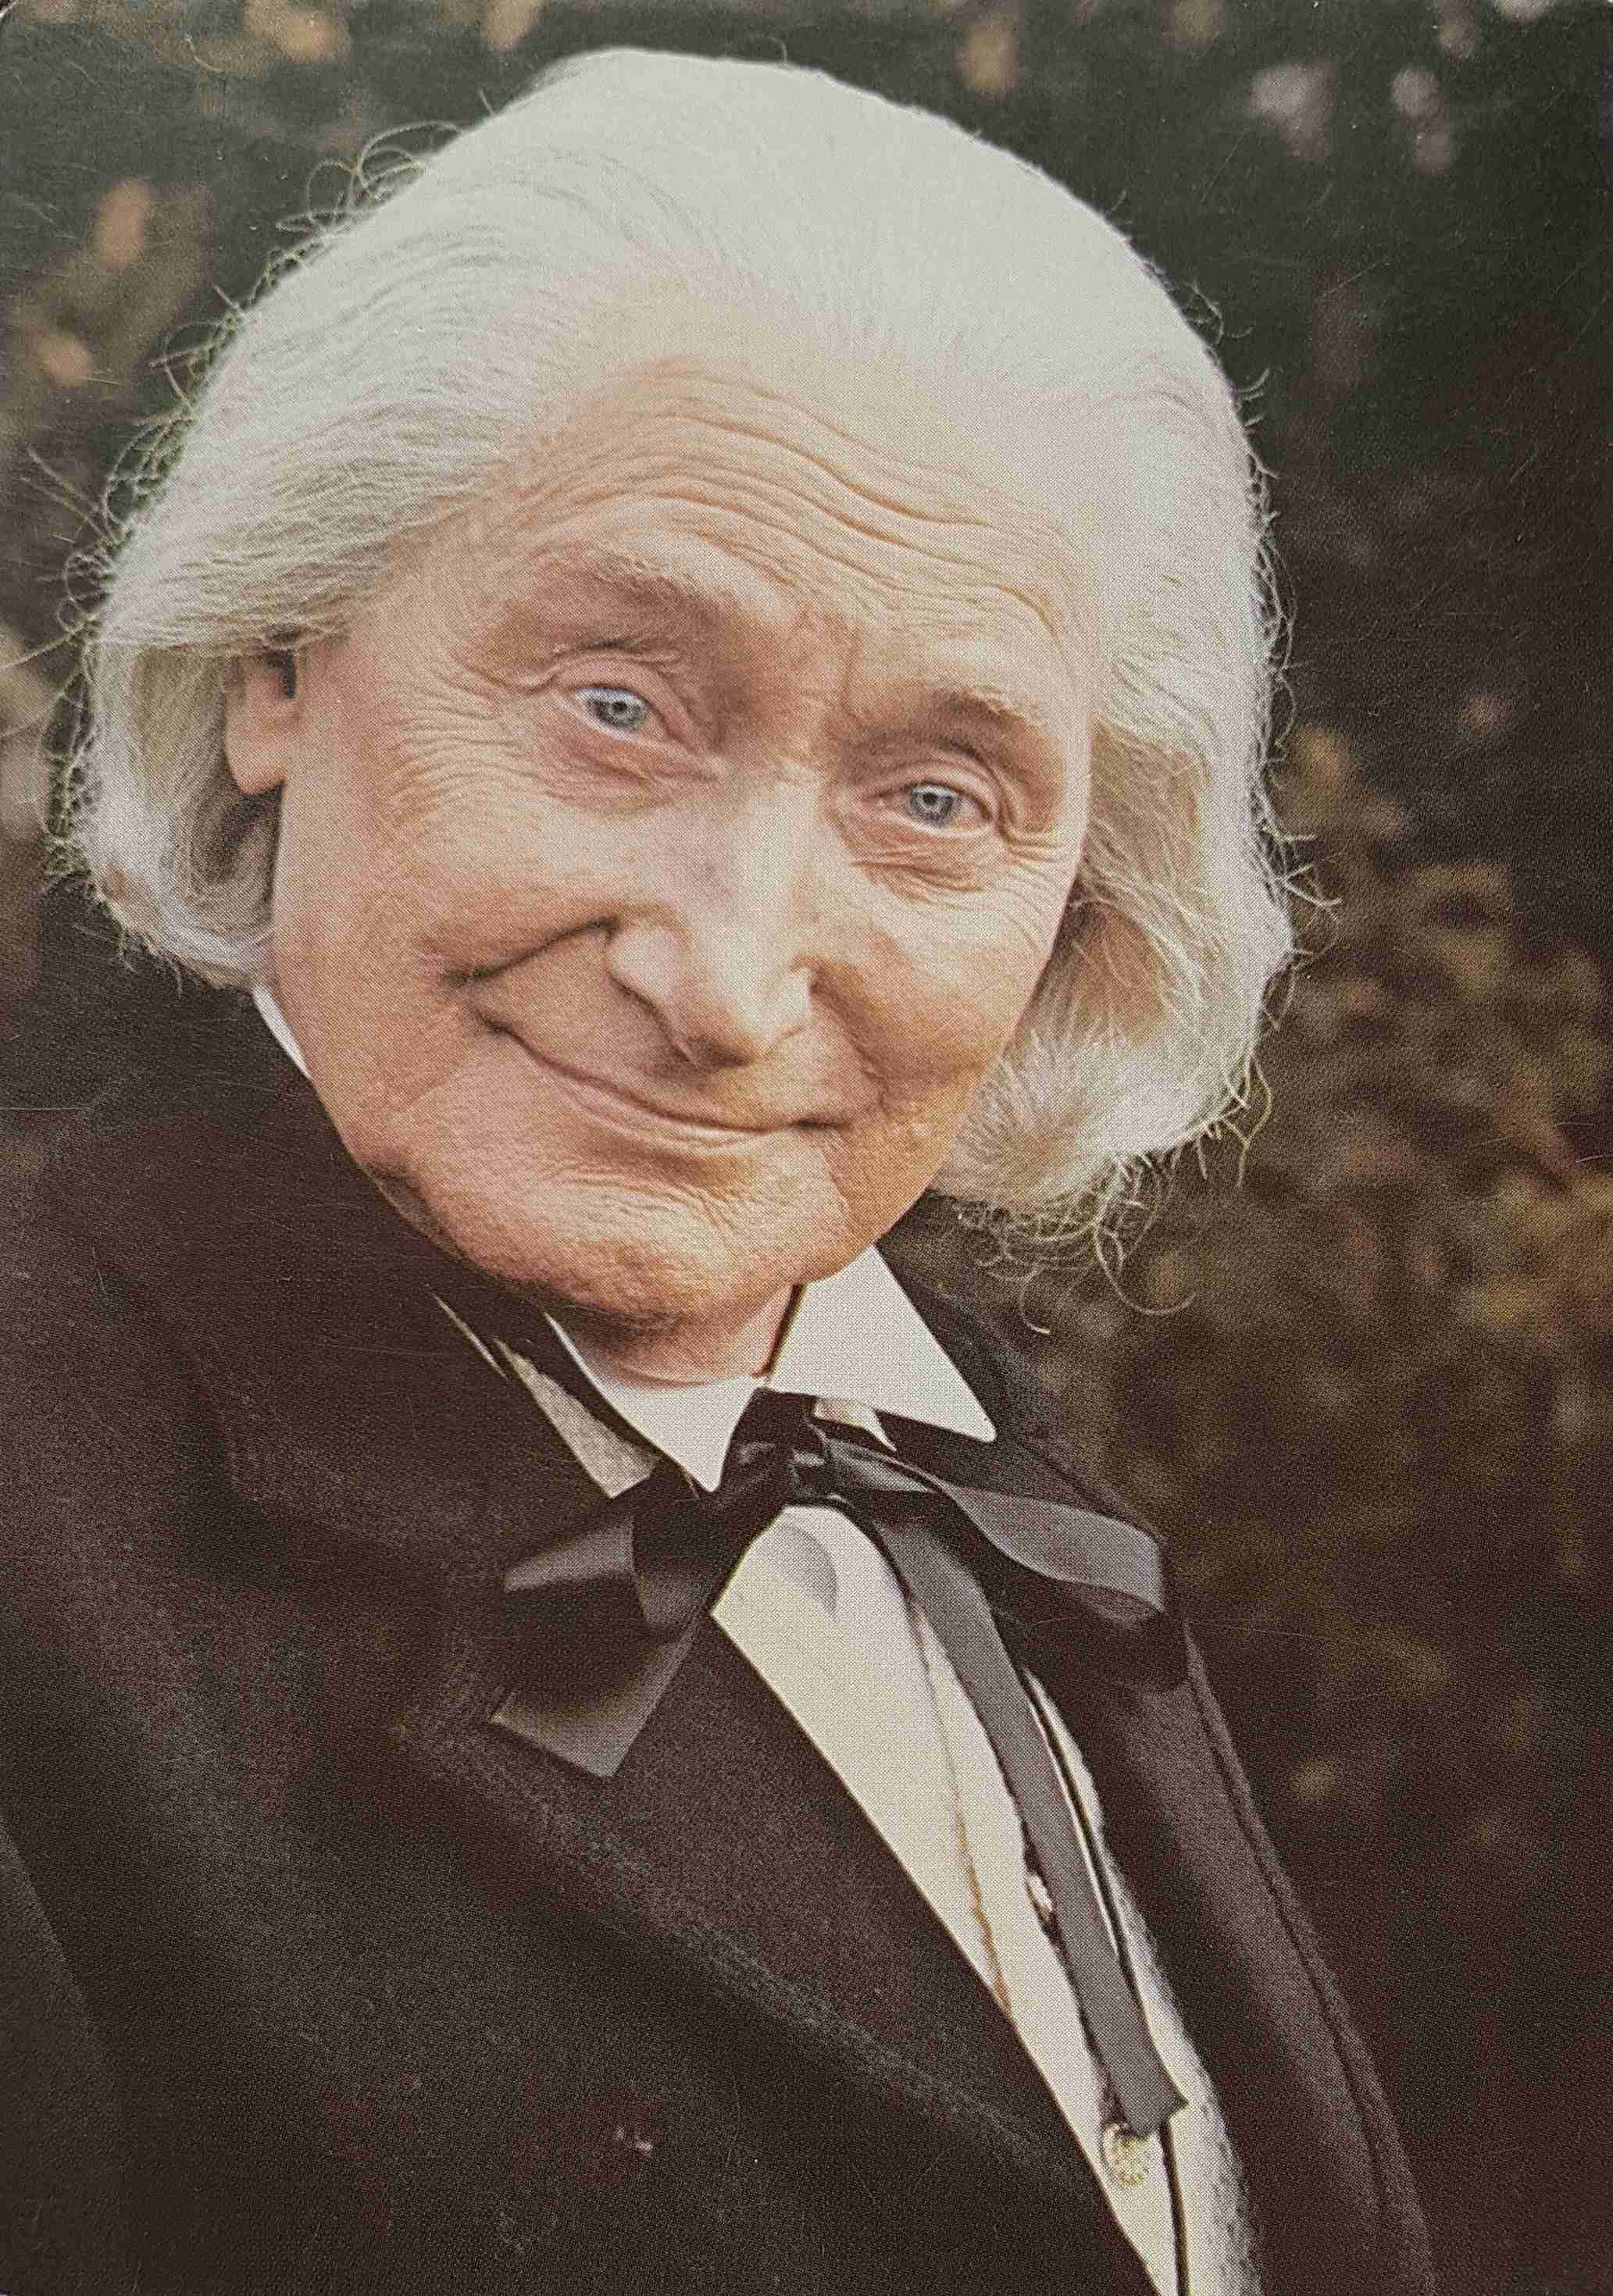 Picture of PC-DW-RH Doctor Who - Richard Hurndall by artist Unknown from the BBC records and Tapes library